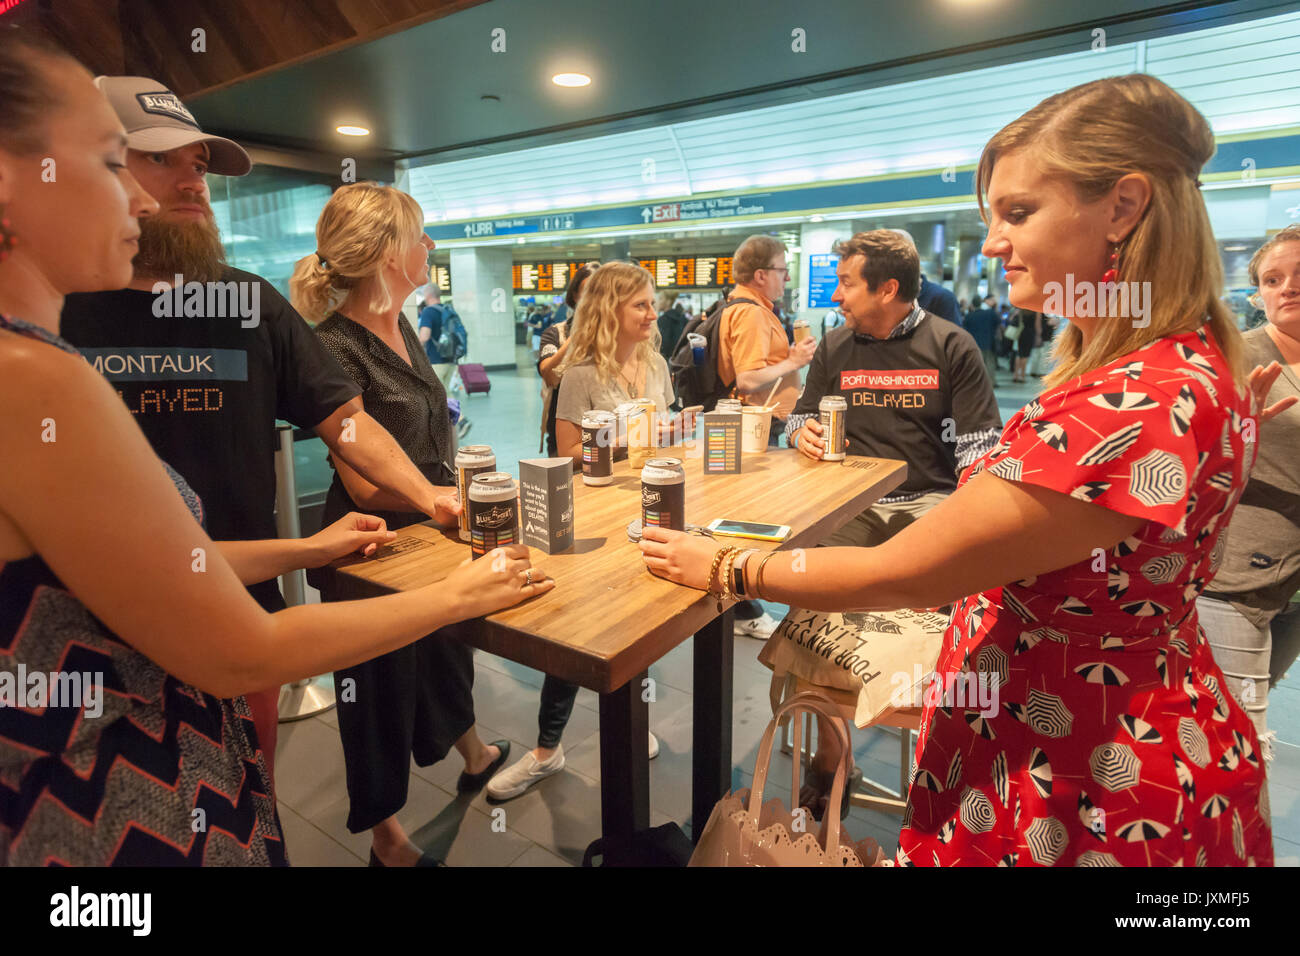 Throngs of hungry burger lovers and thirsty beer drinkers flock to the Shake Shack in Penn Station in New York on Monday, August 14, 2017 for the happy hour debut party of Blue Point Brewery's 'Delayed' beer. Reacting to the 'Summer of Hell' that Long Island Railroad passengers are going through because of maintenance track work Blue Point Brewery created their 'Delayed' pilsner beer with the graphics on the can a riff on the LIRR departure boards. The first 100 customers got a free burger with the purchase of a can of 'Delayed'.  ( © Richard B. Levine) Stock Photo